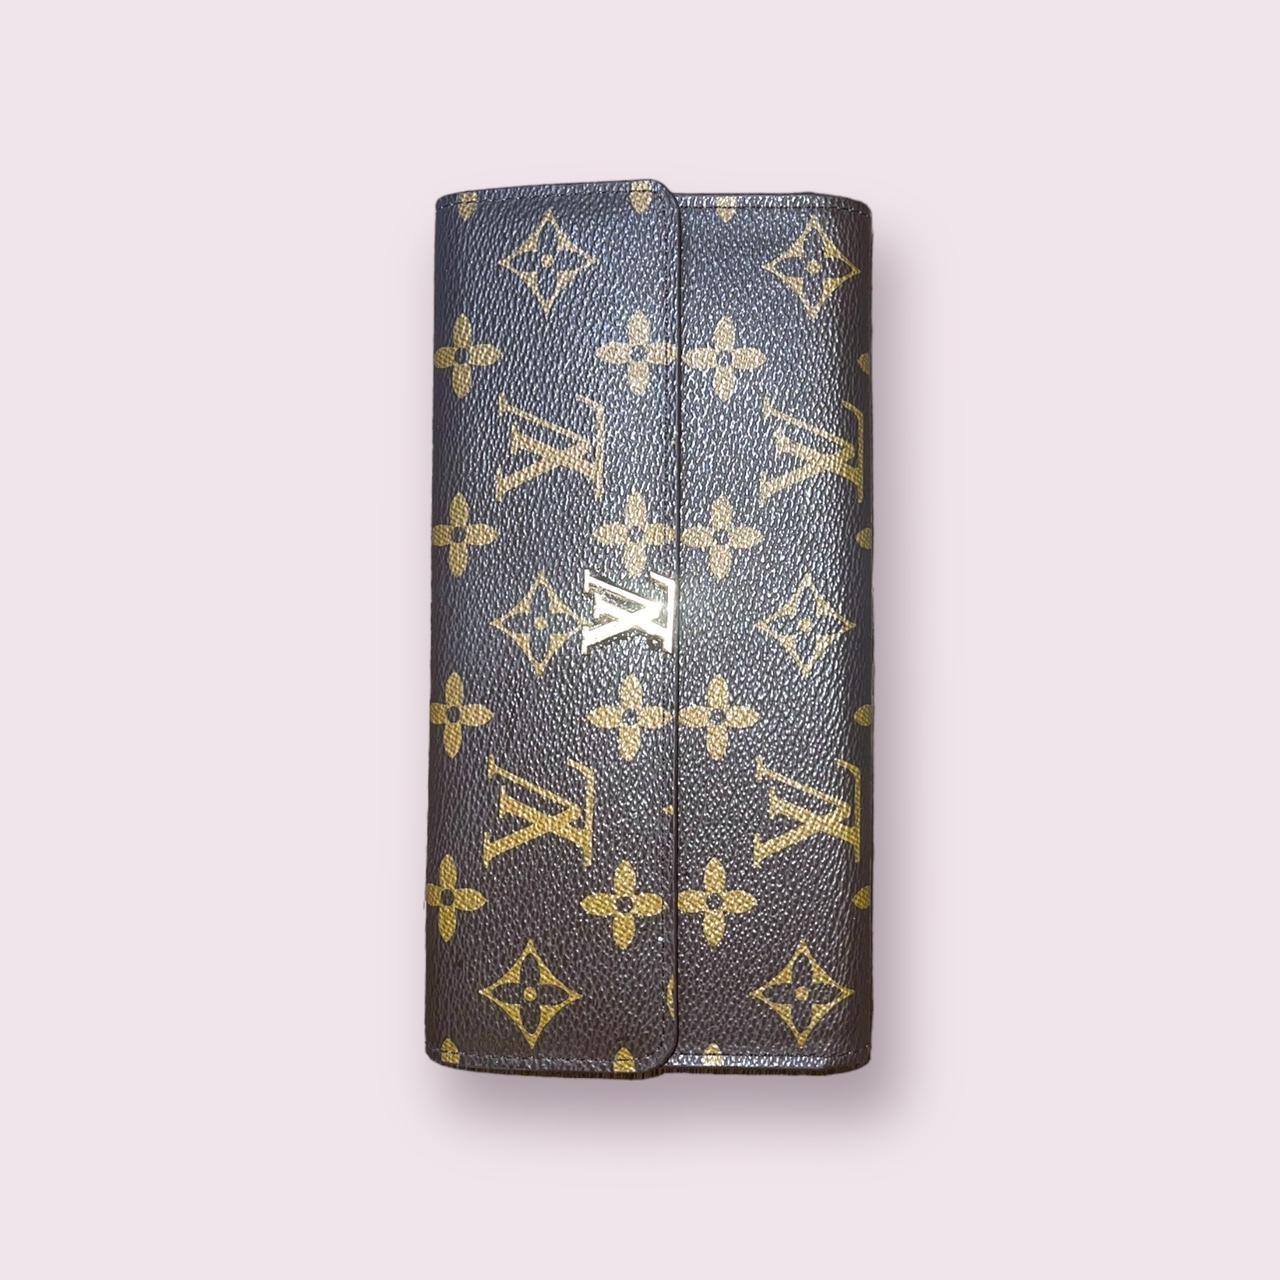 Slightly used Louis Vuitton wallet with the red on - Depop